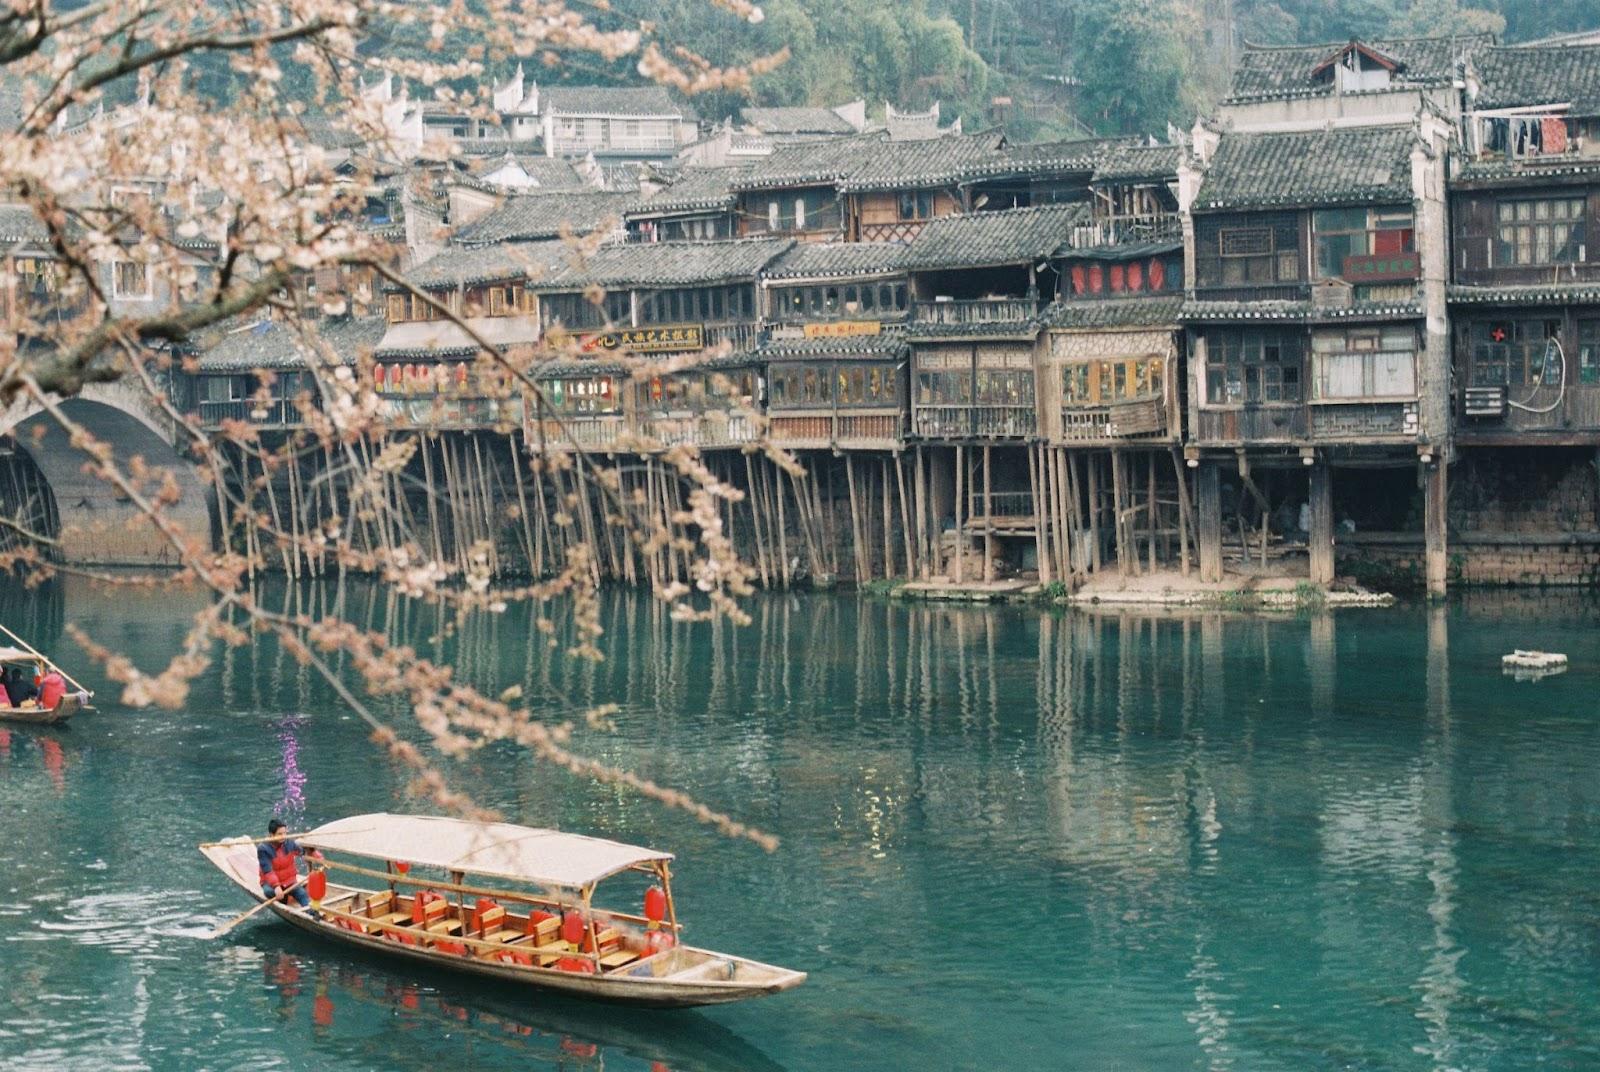 Boat on the river in Pheonix Ancient Town in China